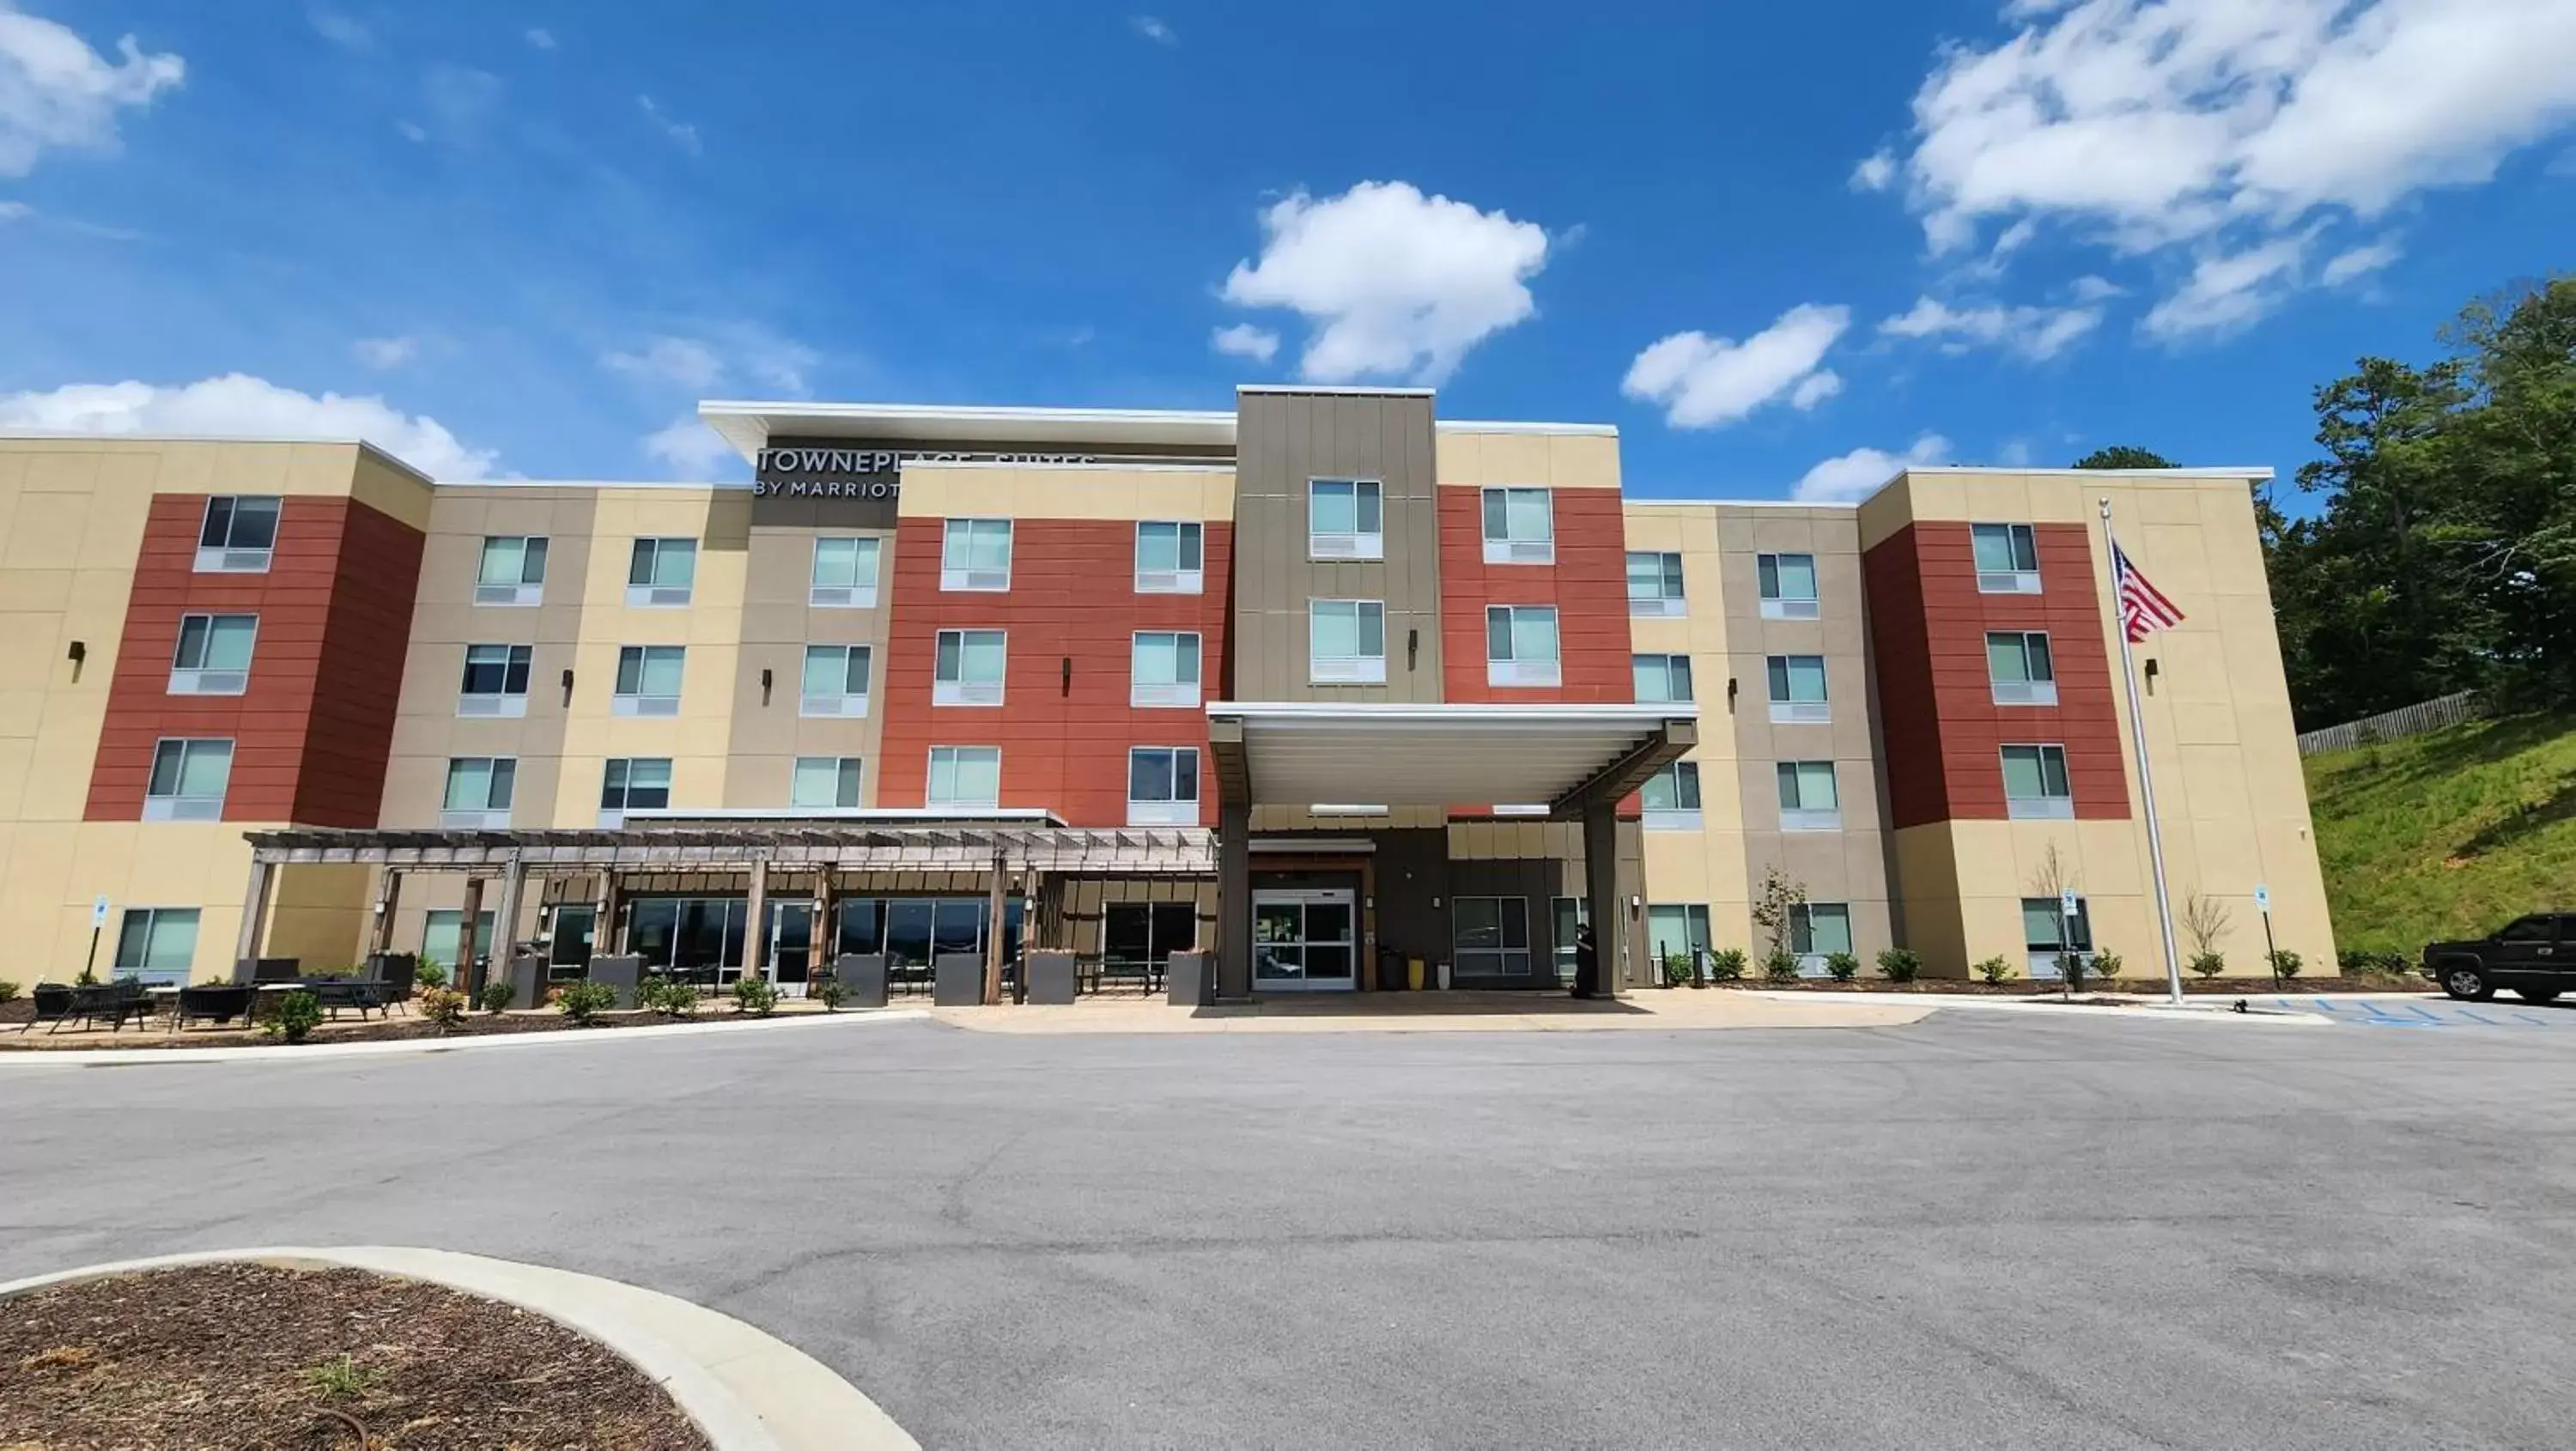 Property Building in TownePlace Suites by Marriott Chattanooga South, East Ridge